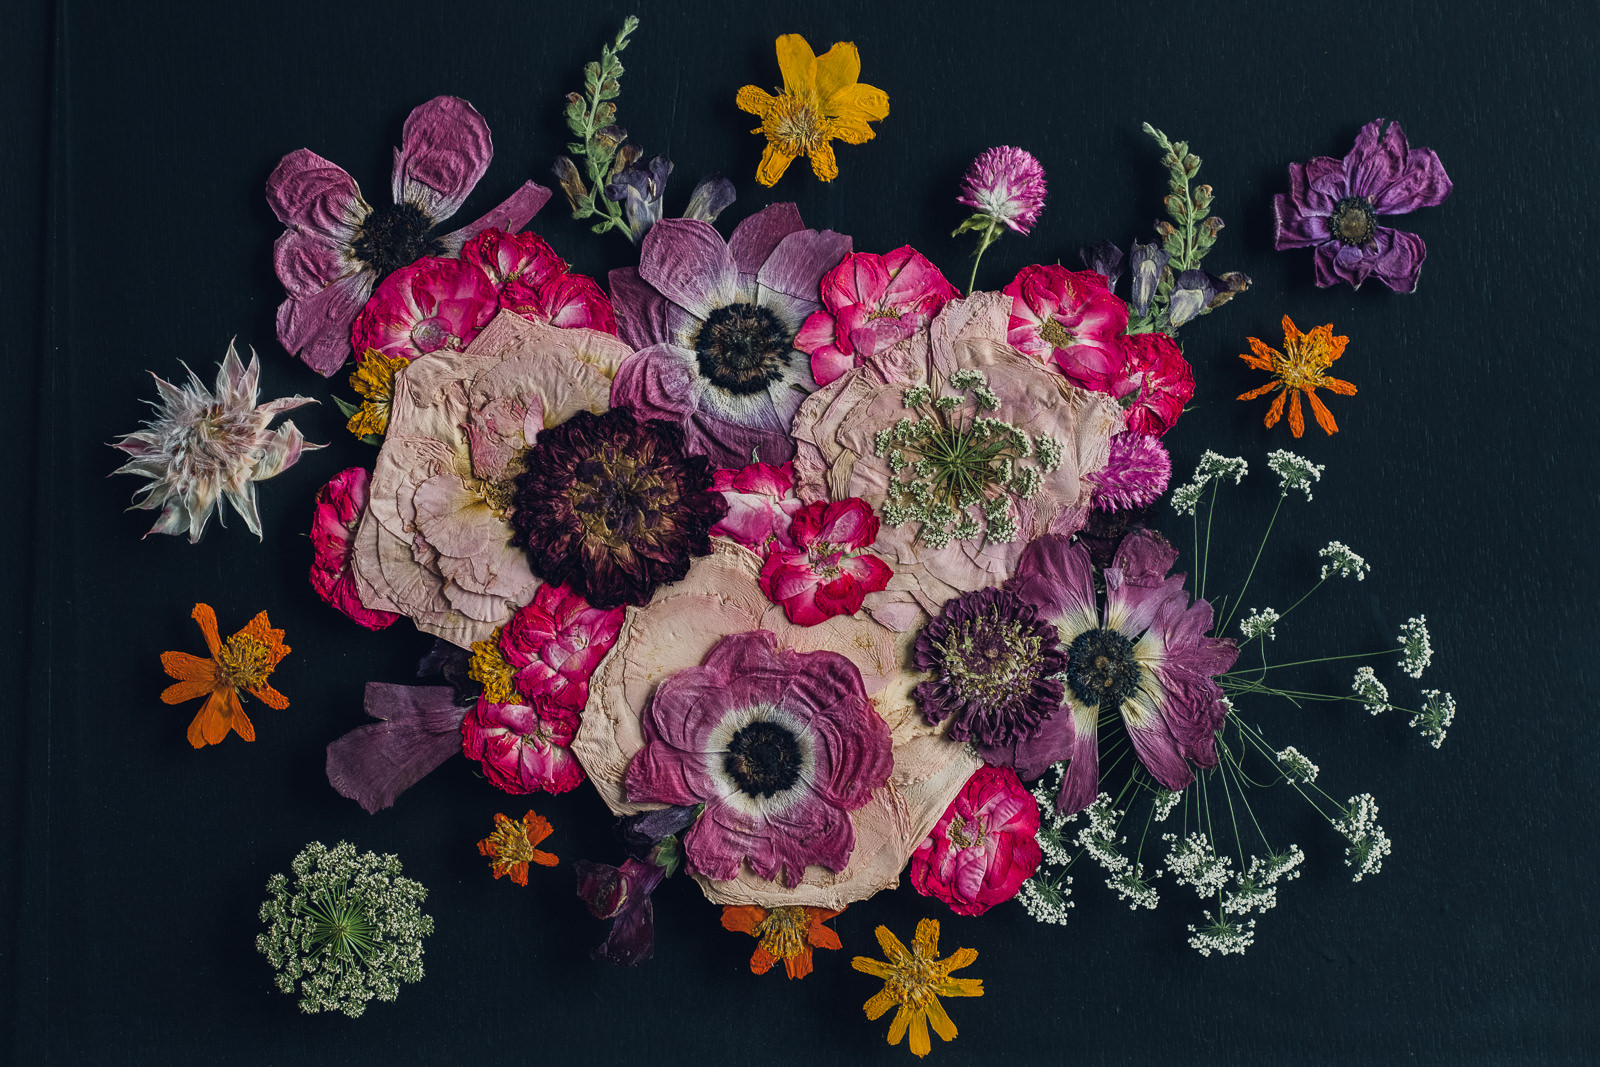 colorful pressed flower art made from bridal bouquet preservation